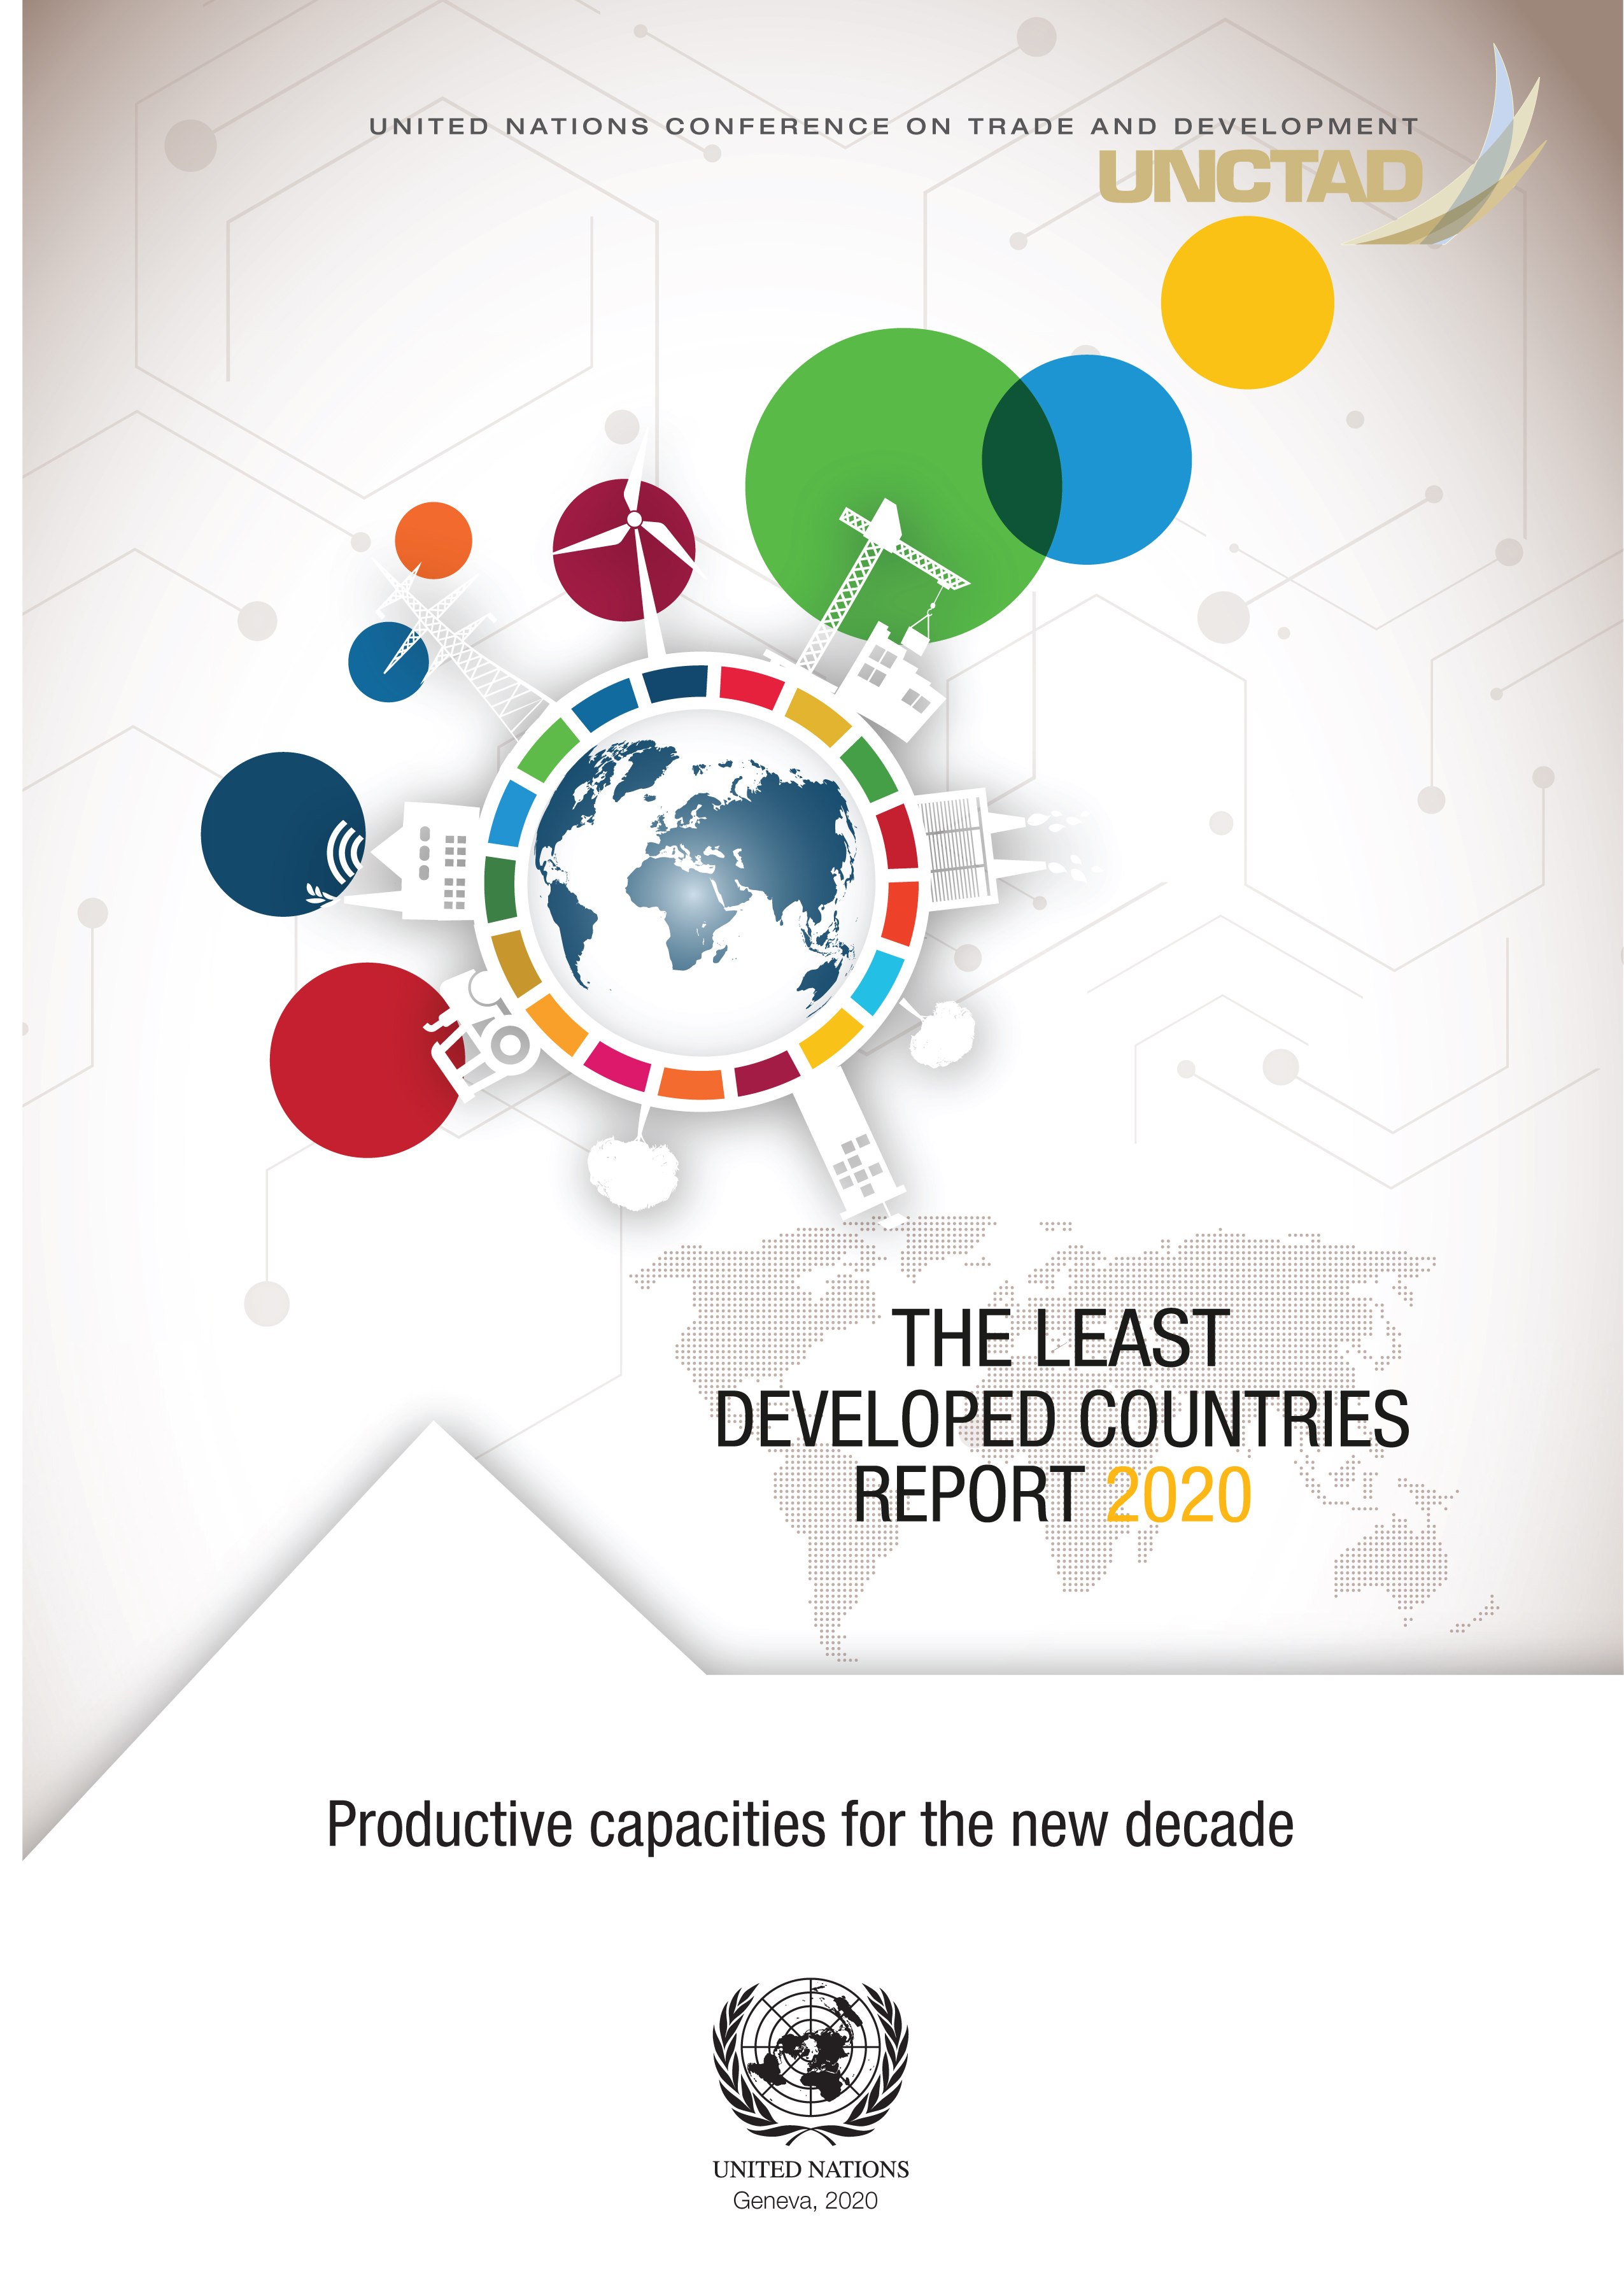 image of Policies to develop productive capacities in the new decade